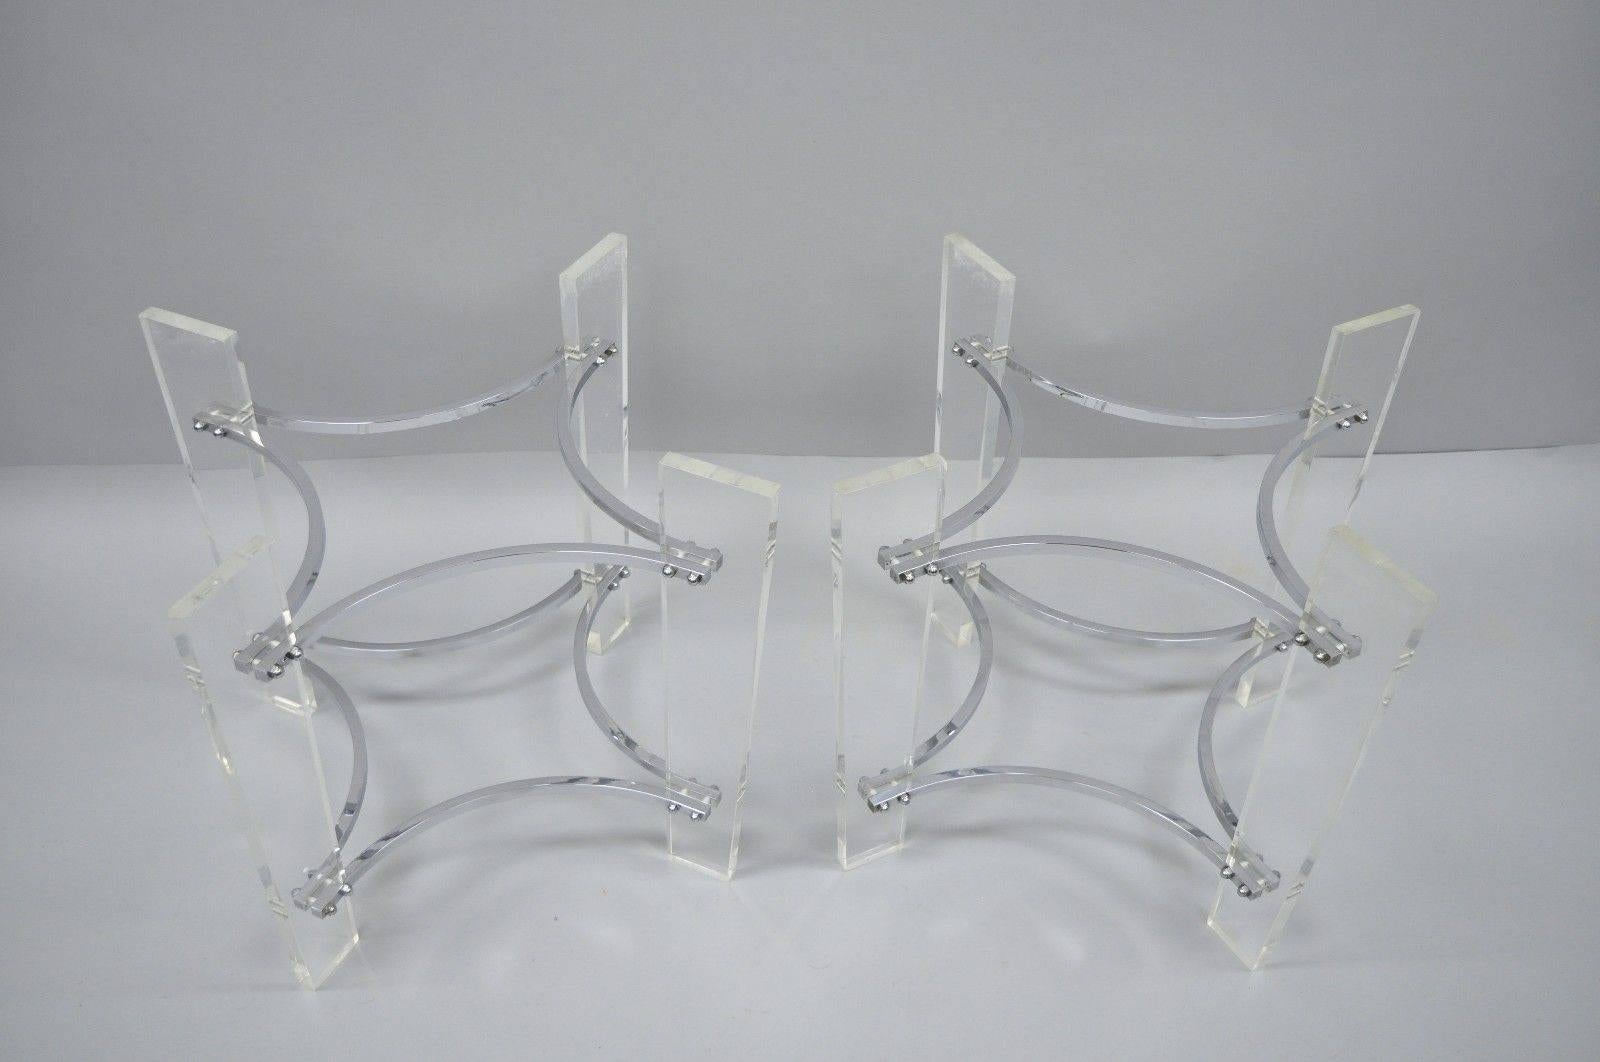 Pair of Lucite & Chrome Sculptural Mid-Century Modern End Table Bases For Sale 7